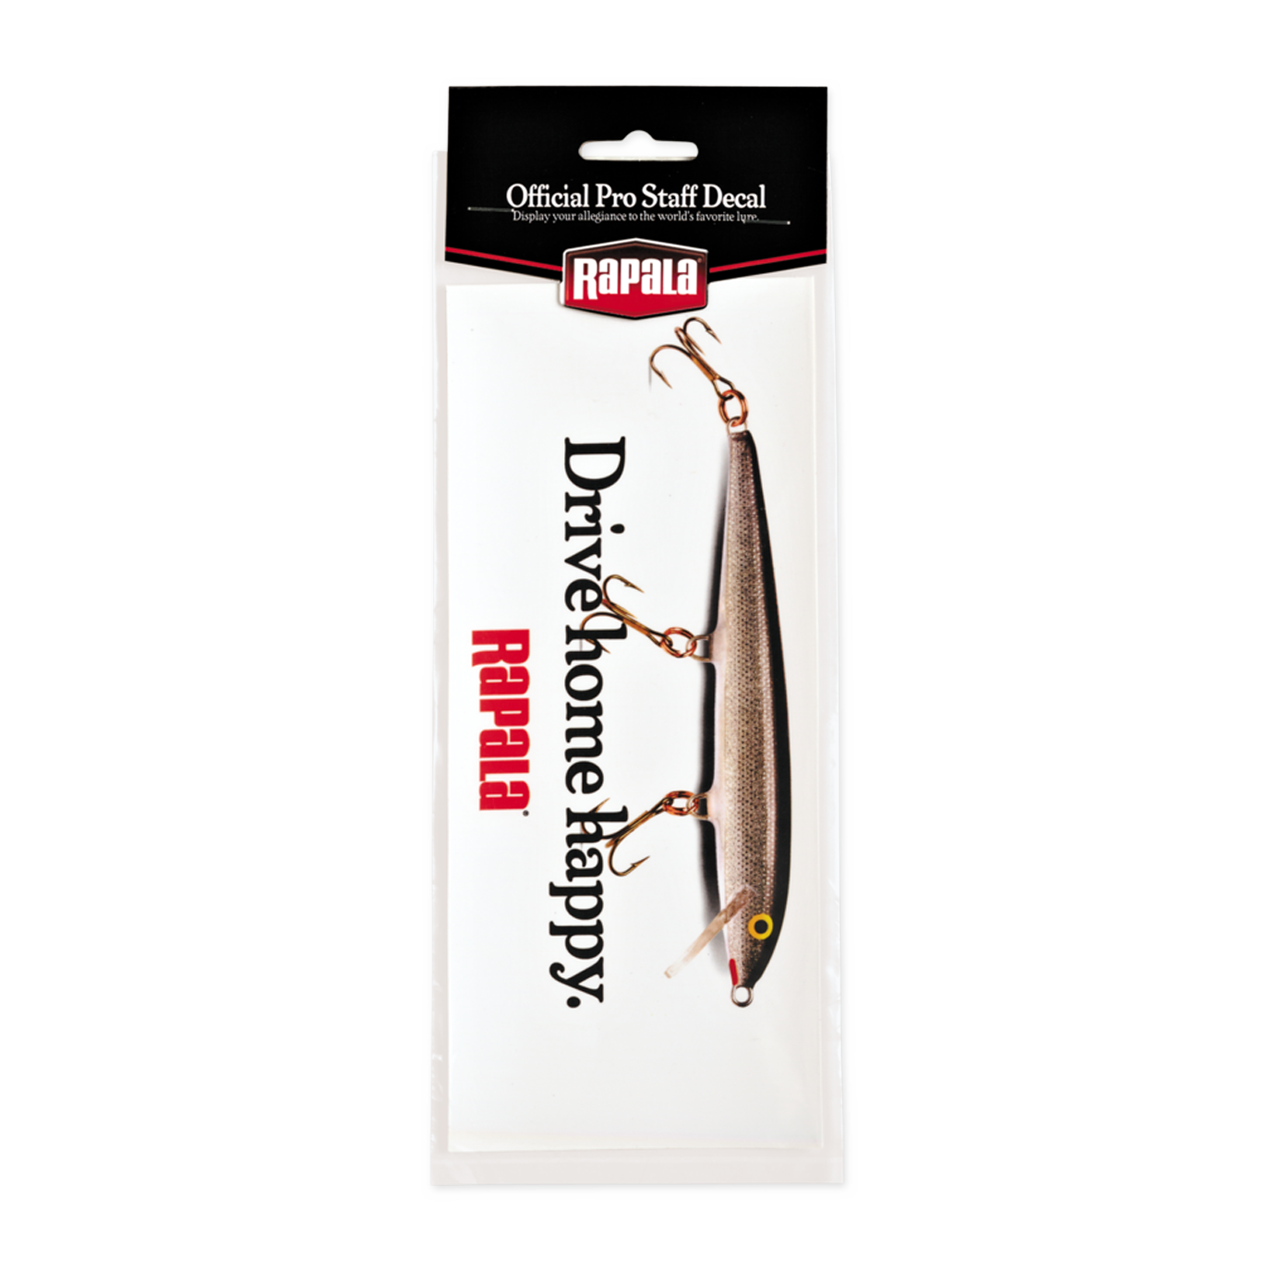 Rapala Drive Home Happy Decal 9” x 4” - Tackle Depot